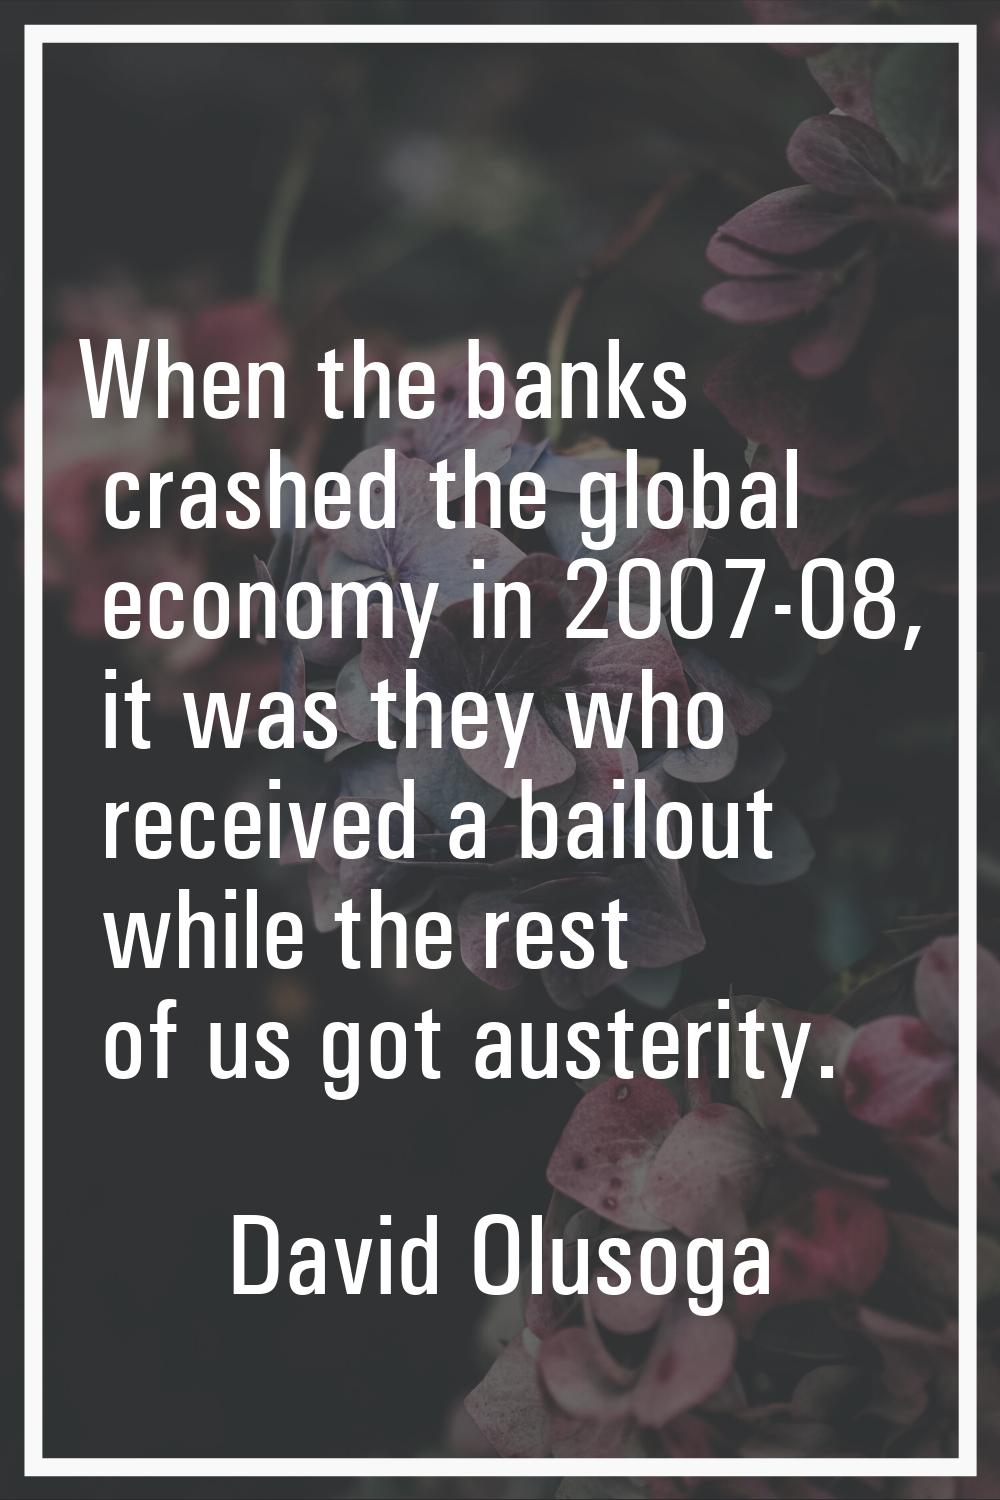 When the banks crashed the global economy in 2007-08, it was they who received a bailout while the 